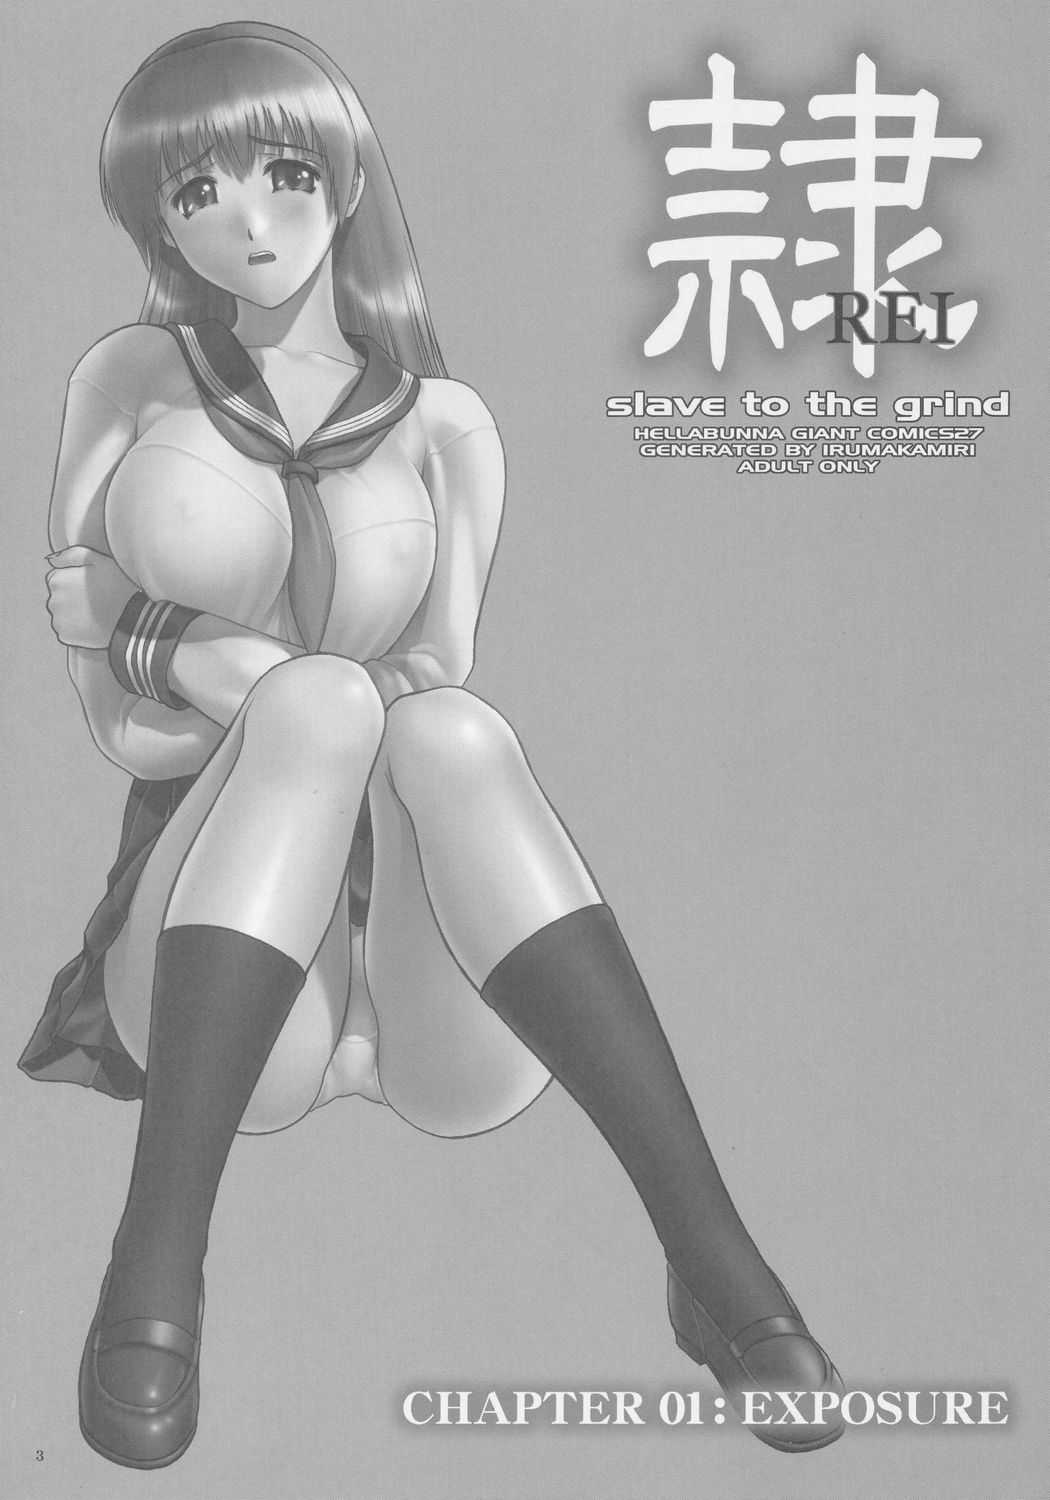 [Hellabunna] REI - slave to the grind - CHAPTER 1: EXPOSURE (Dead or Alive) [へらぶな] 隷 REI - slave to the grind - CHAPTER 1: EXPOSURE (デッドオアアライブ)